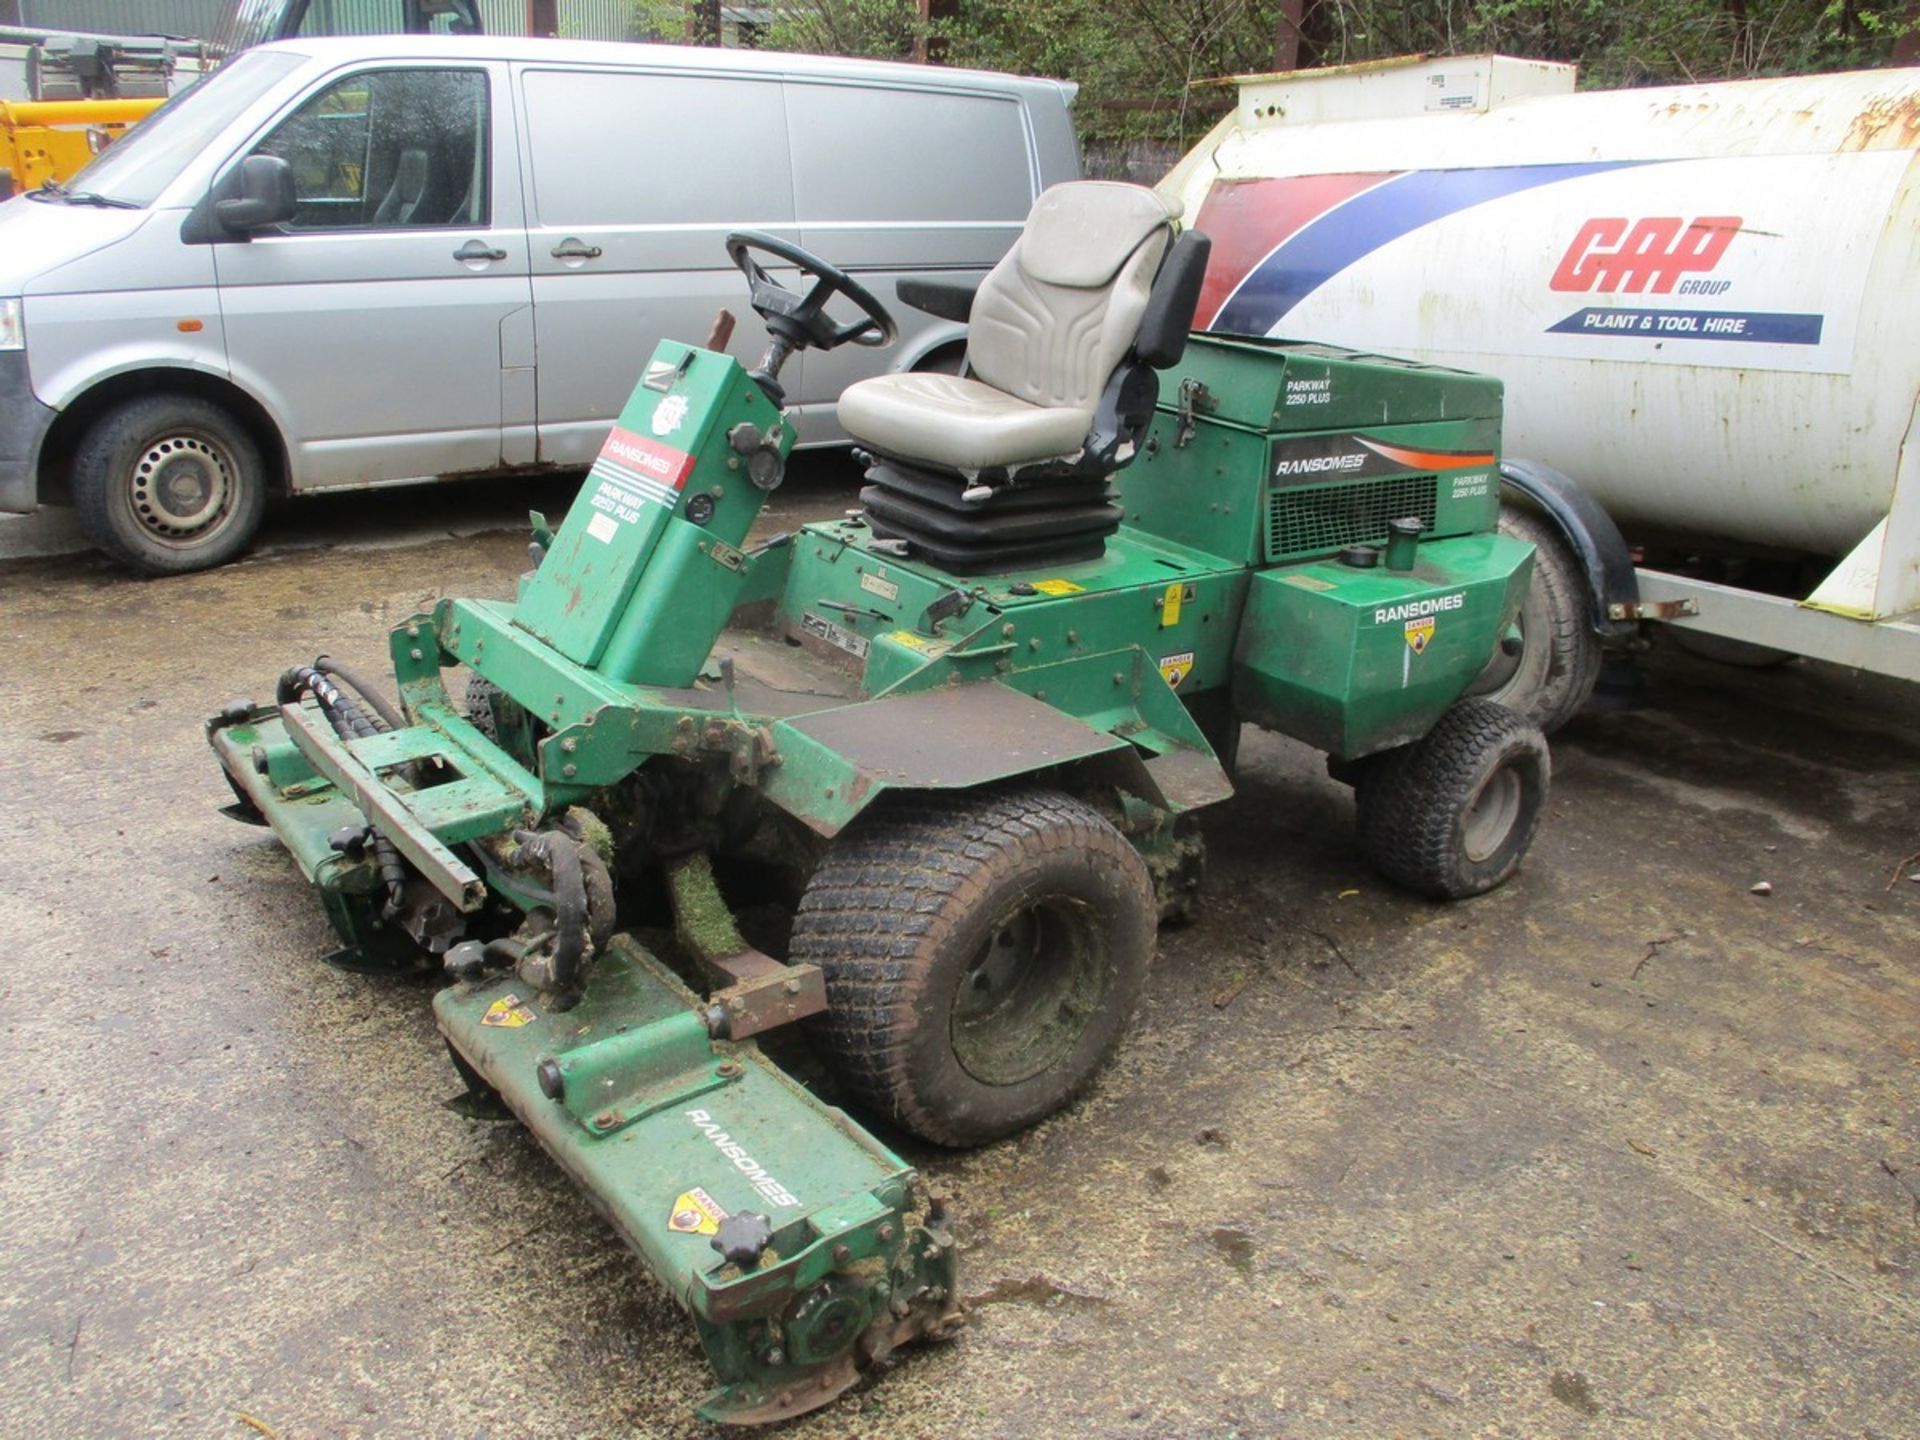 RANSOMES PARKWAY 2250 PLUS RIDE ON MOWER - Image 3 of 6